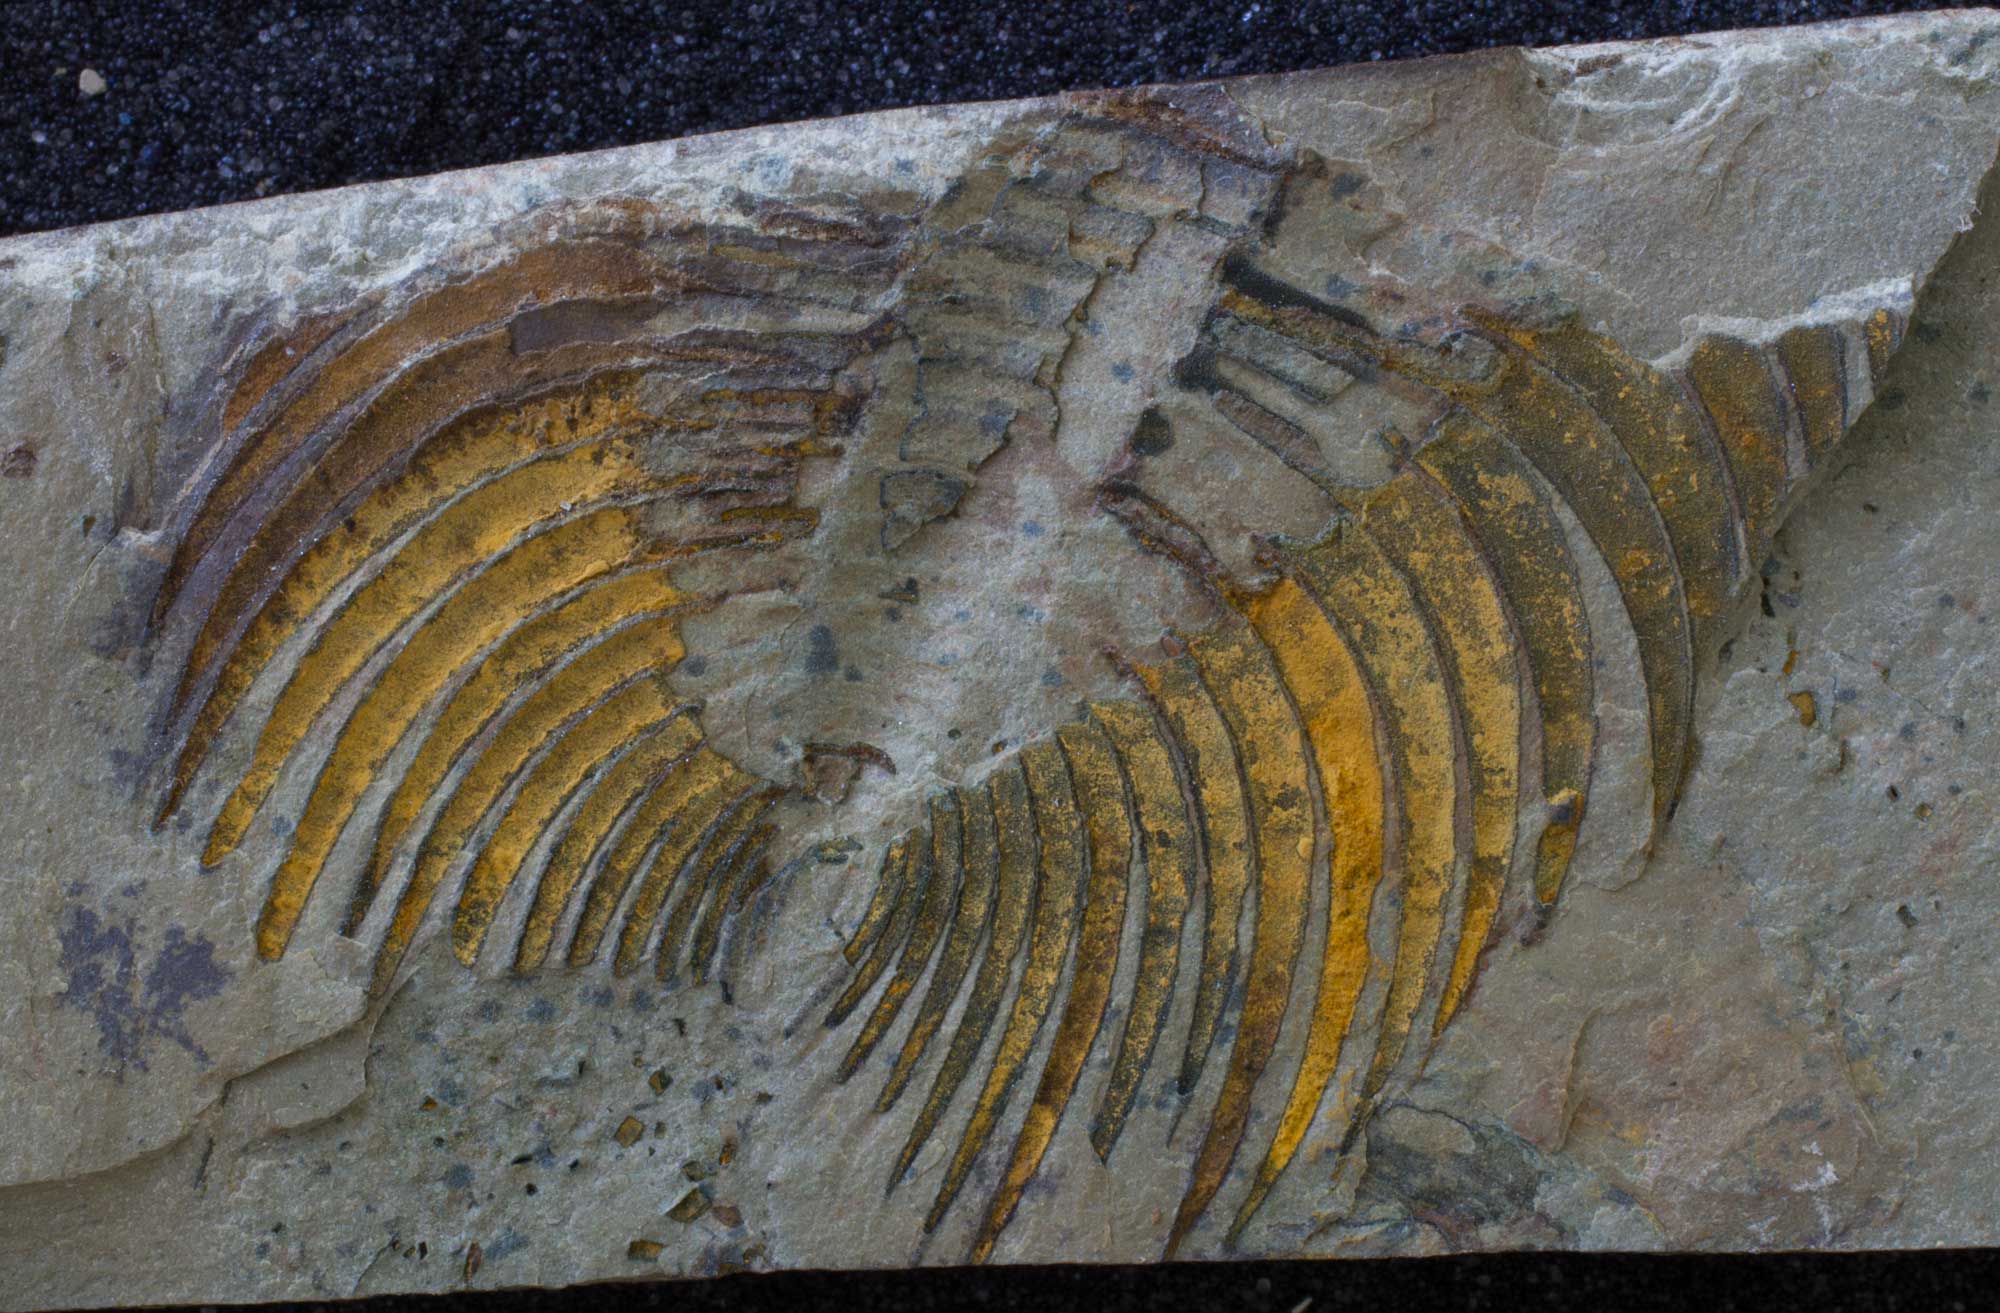 Photograph of the rear end of the trilobite Nevadia parvoconica from the Cambrian of Nevada. The sides of the animal has a series of spines that curve backward. The spines are orange in color and stand out from the gray rock matrix.